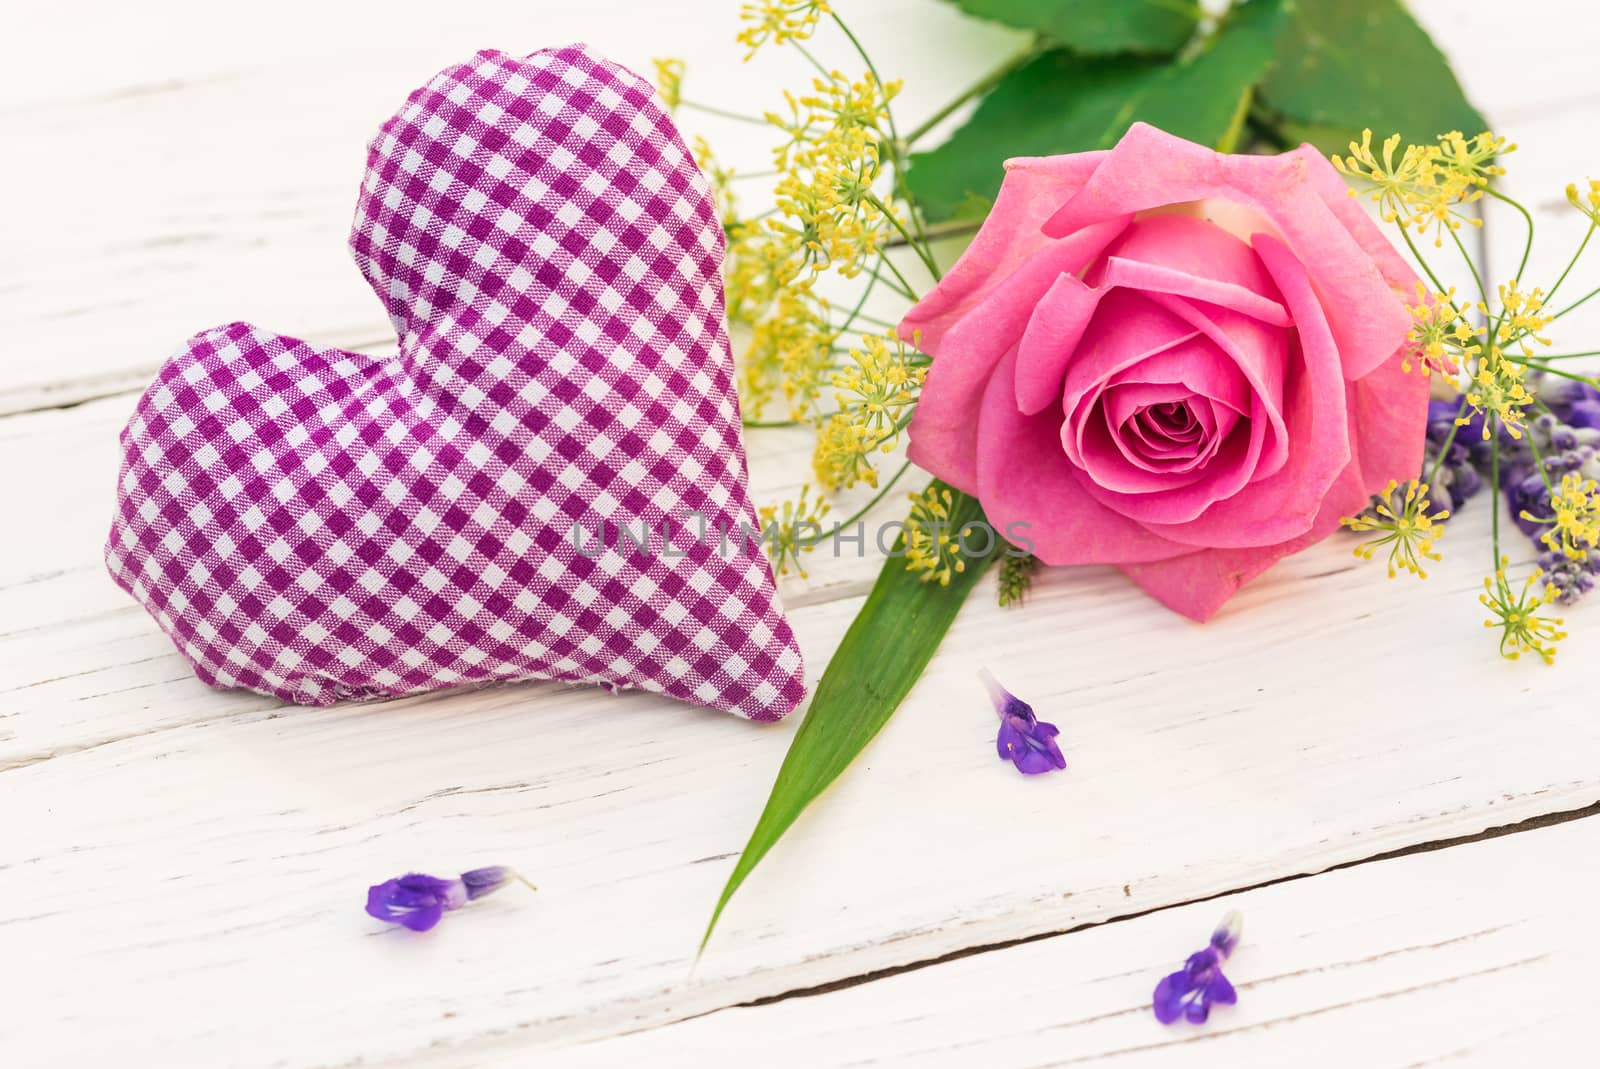 Beautiful bunch of flowers with pink rose and lilac fabric heart on white background